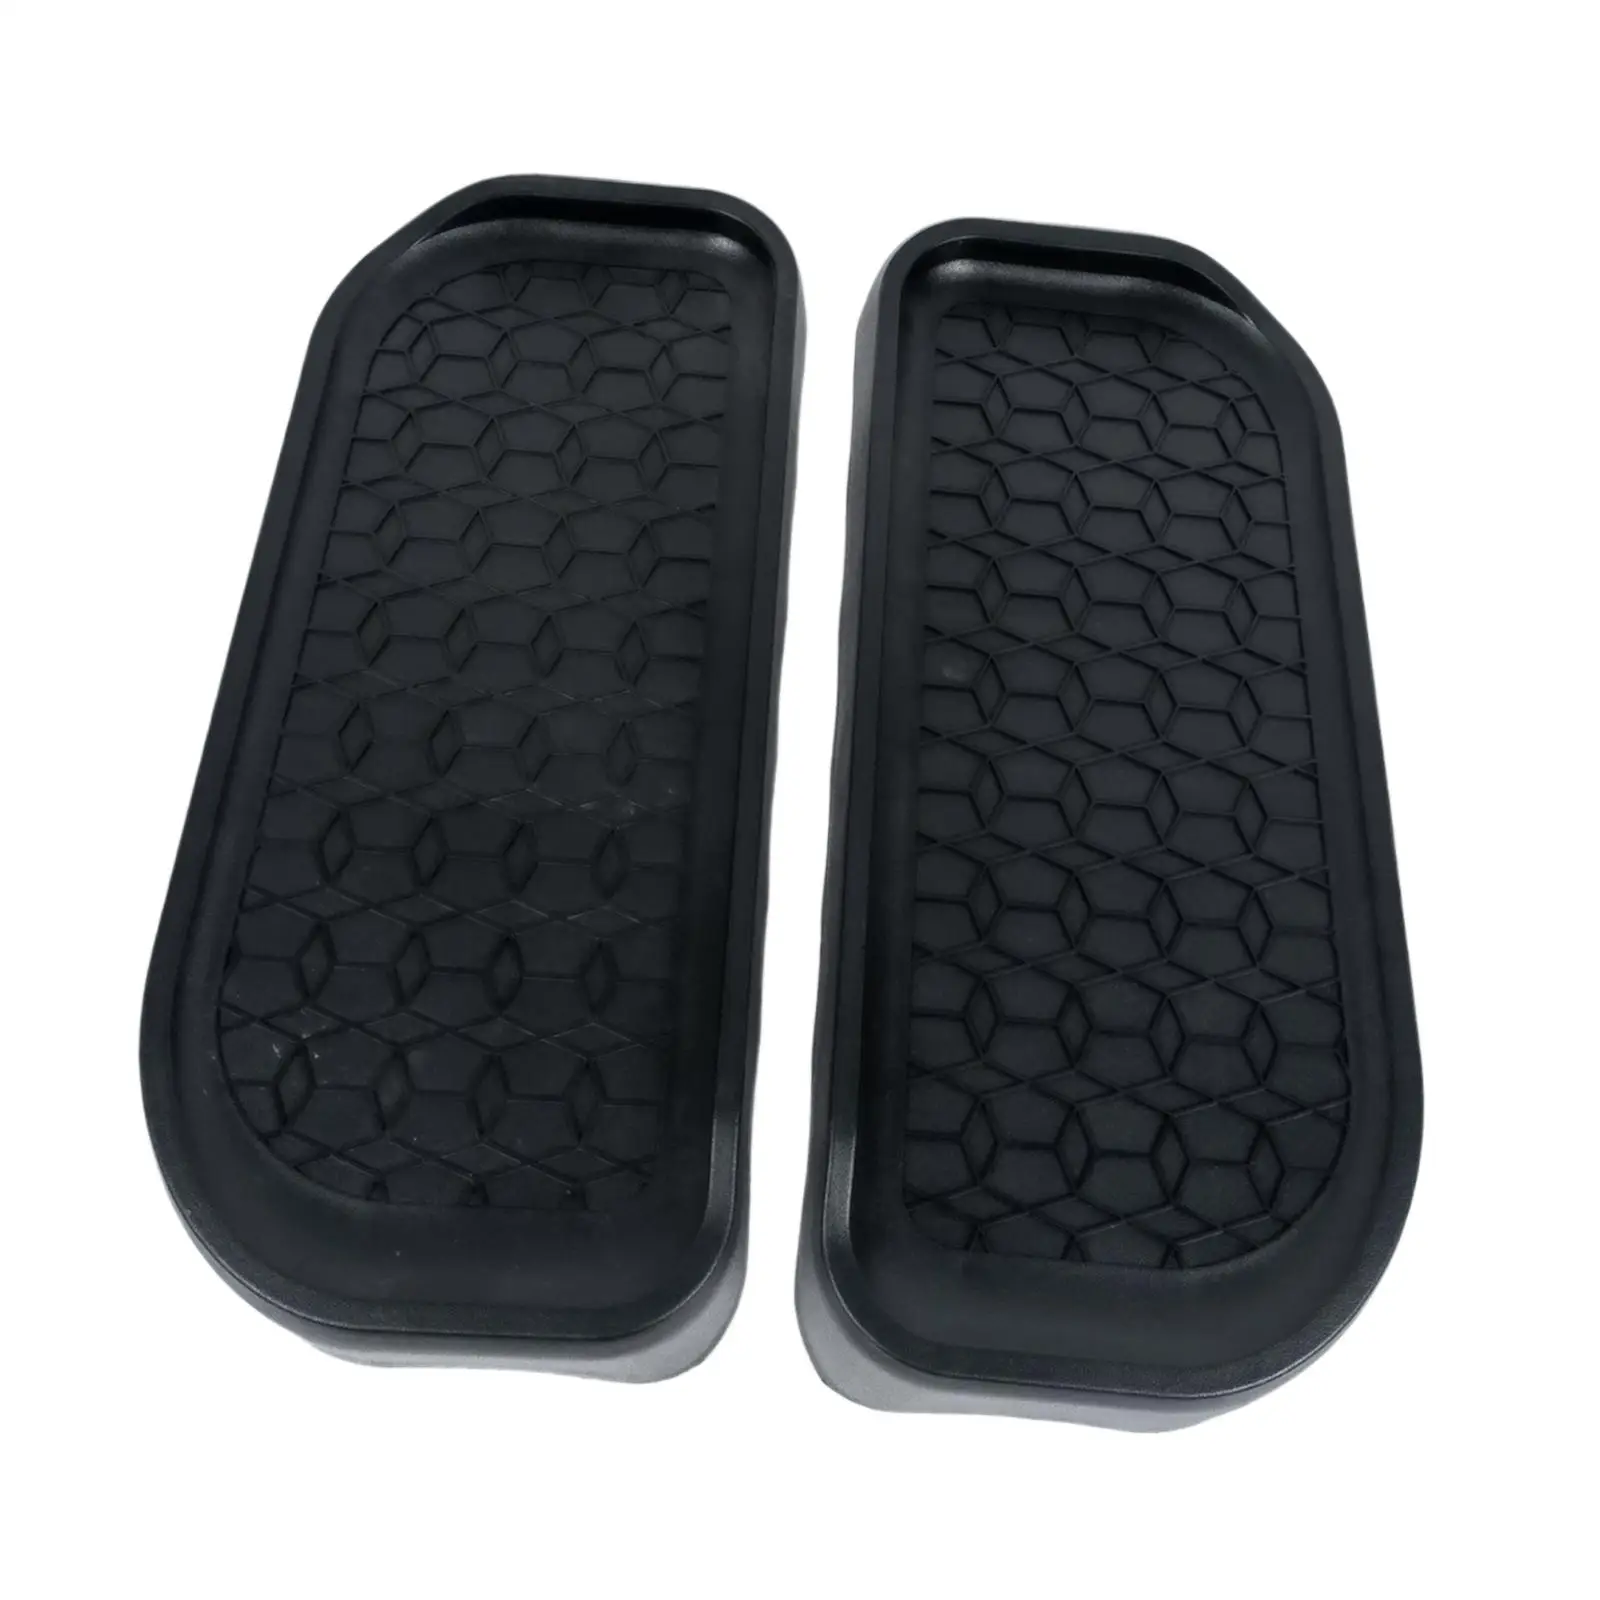 2Pcs Elliptical Machine Foot Pedals Leg Training Pedals Simple to Install